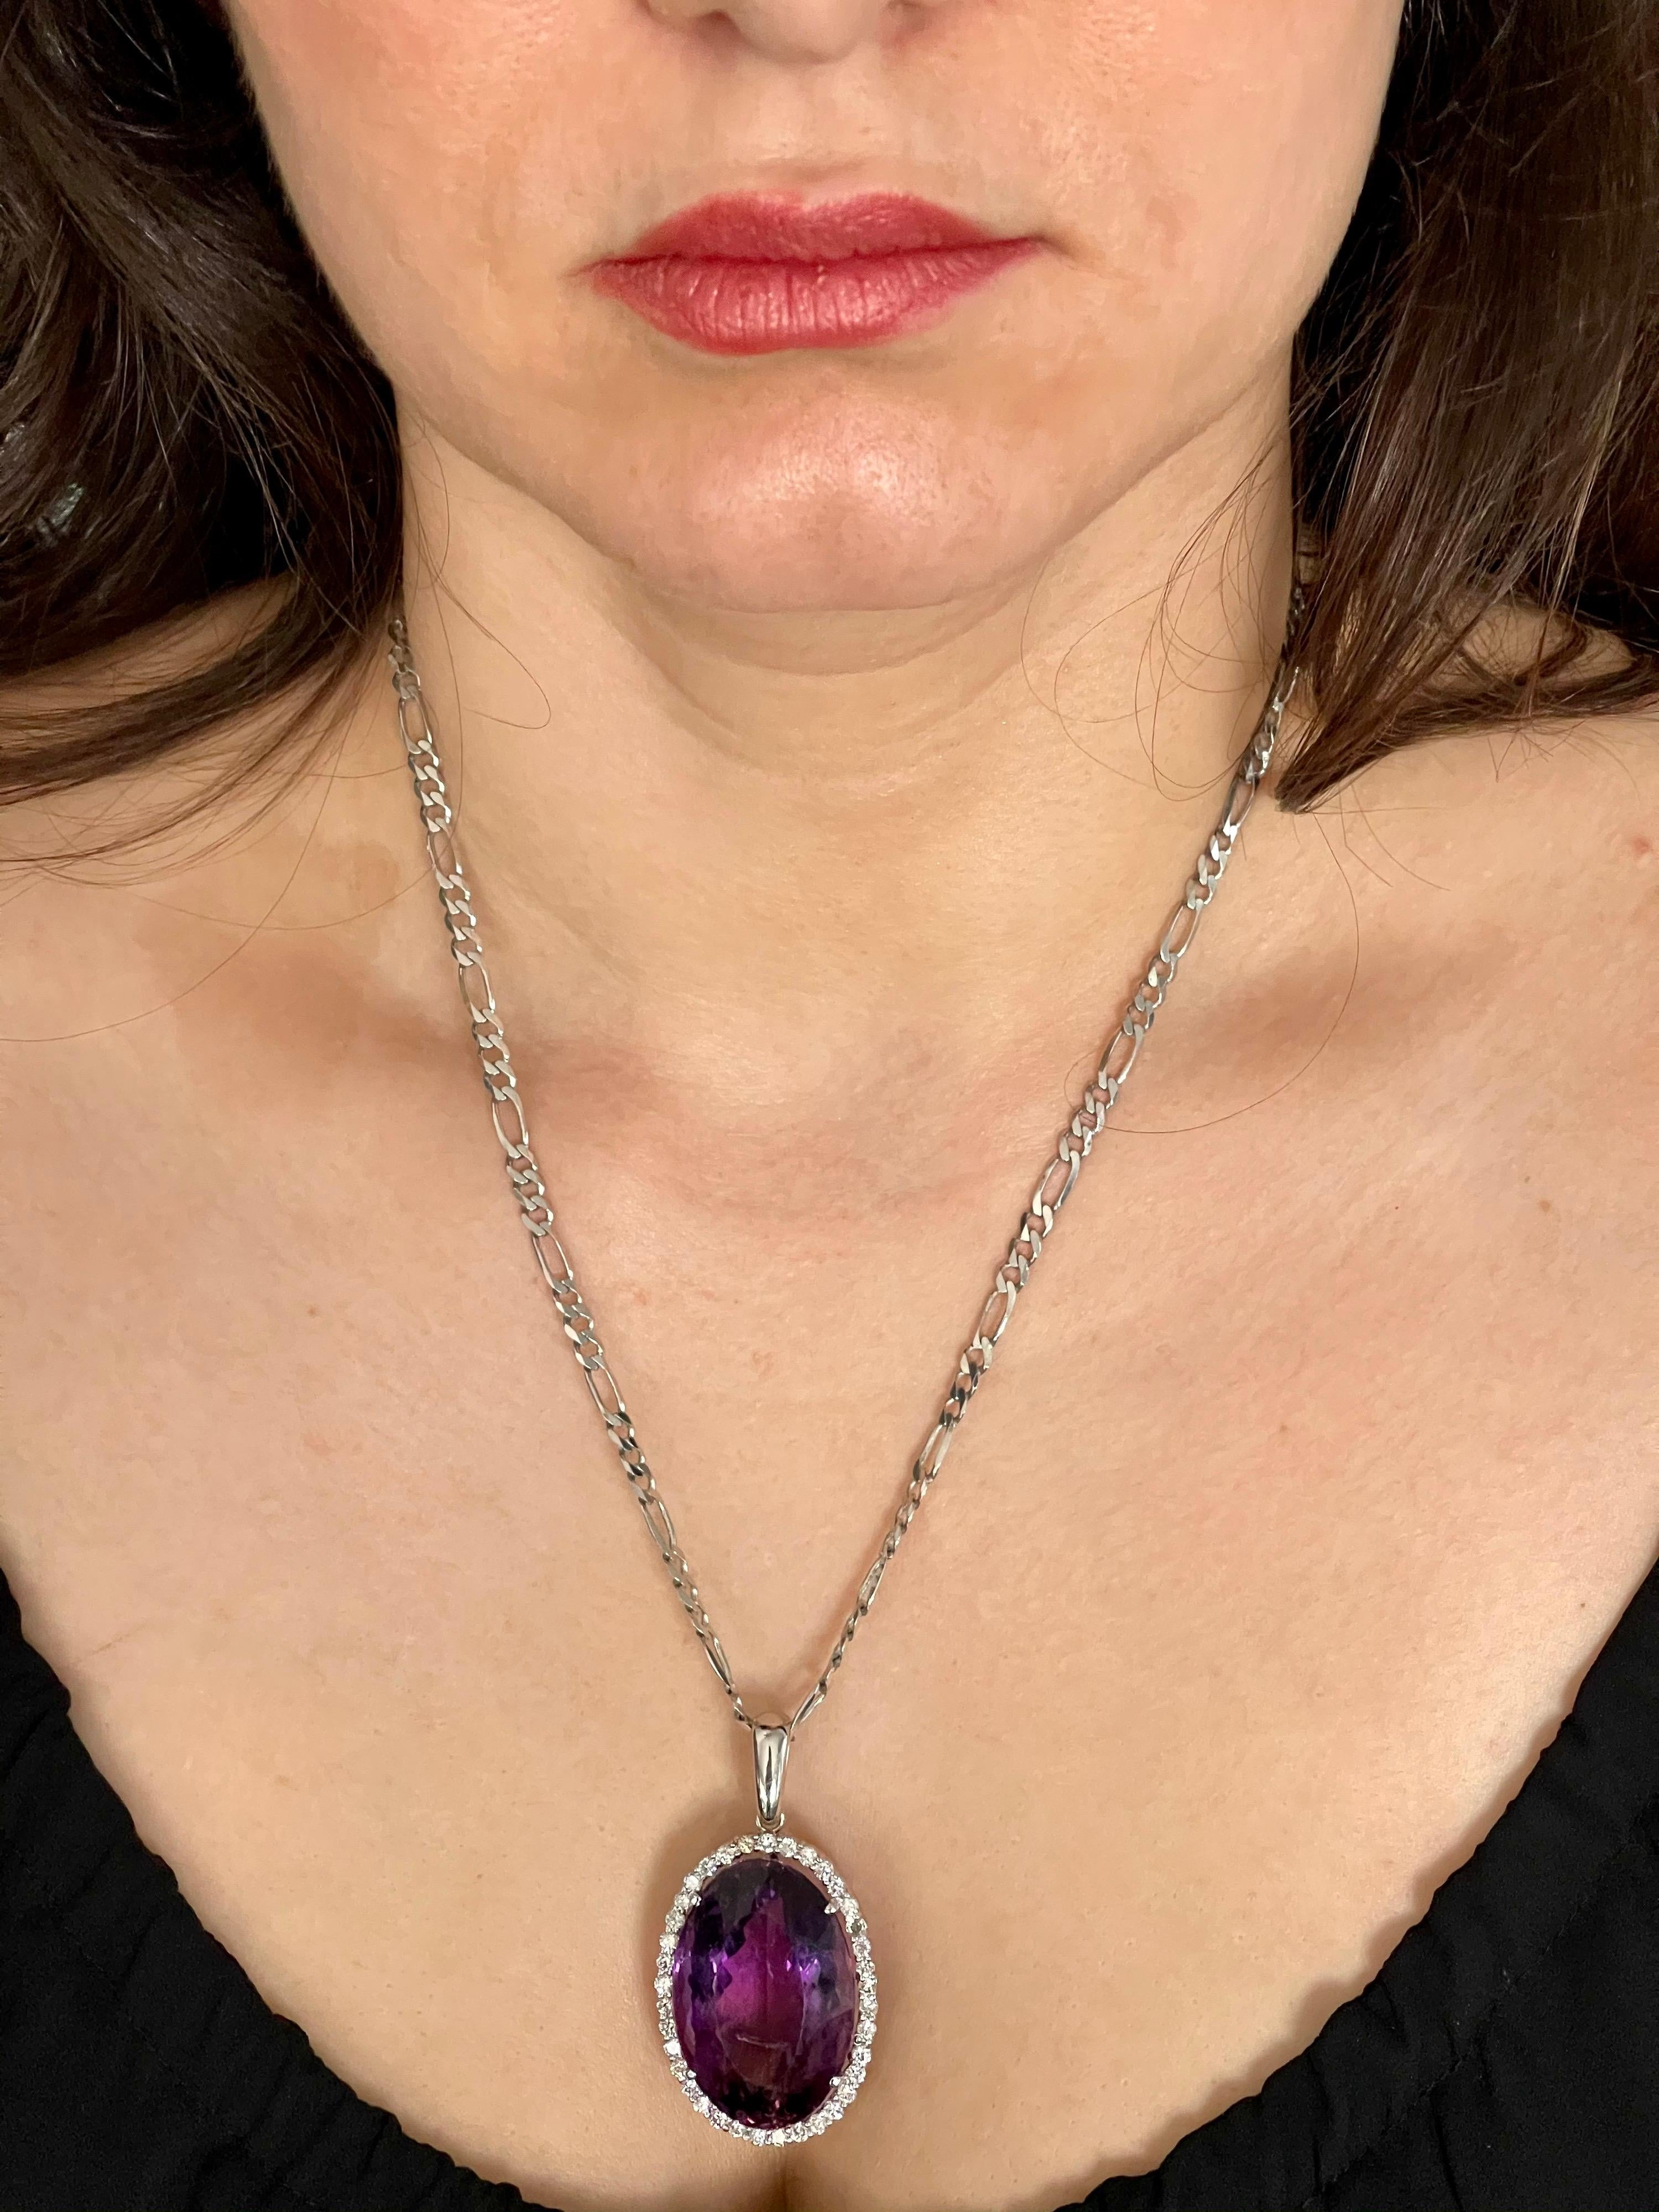 ALARRI 8.75 Carat 14K Solid White Gold Finders Keepers Amethyst Necklace with 22 Inch Chain Length 